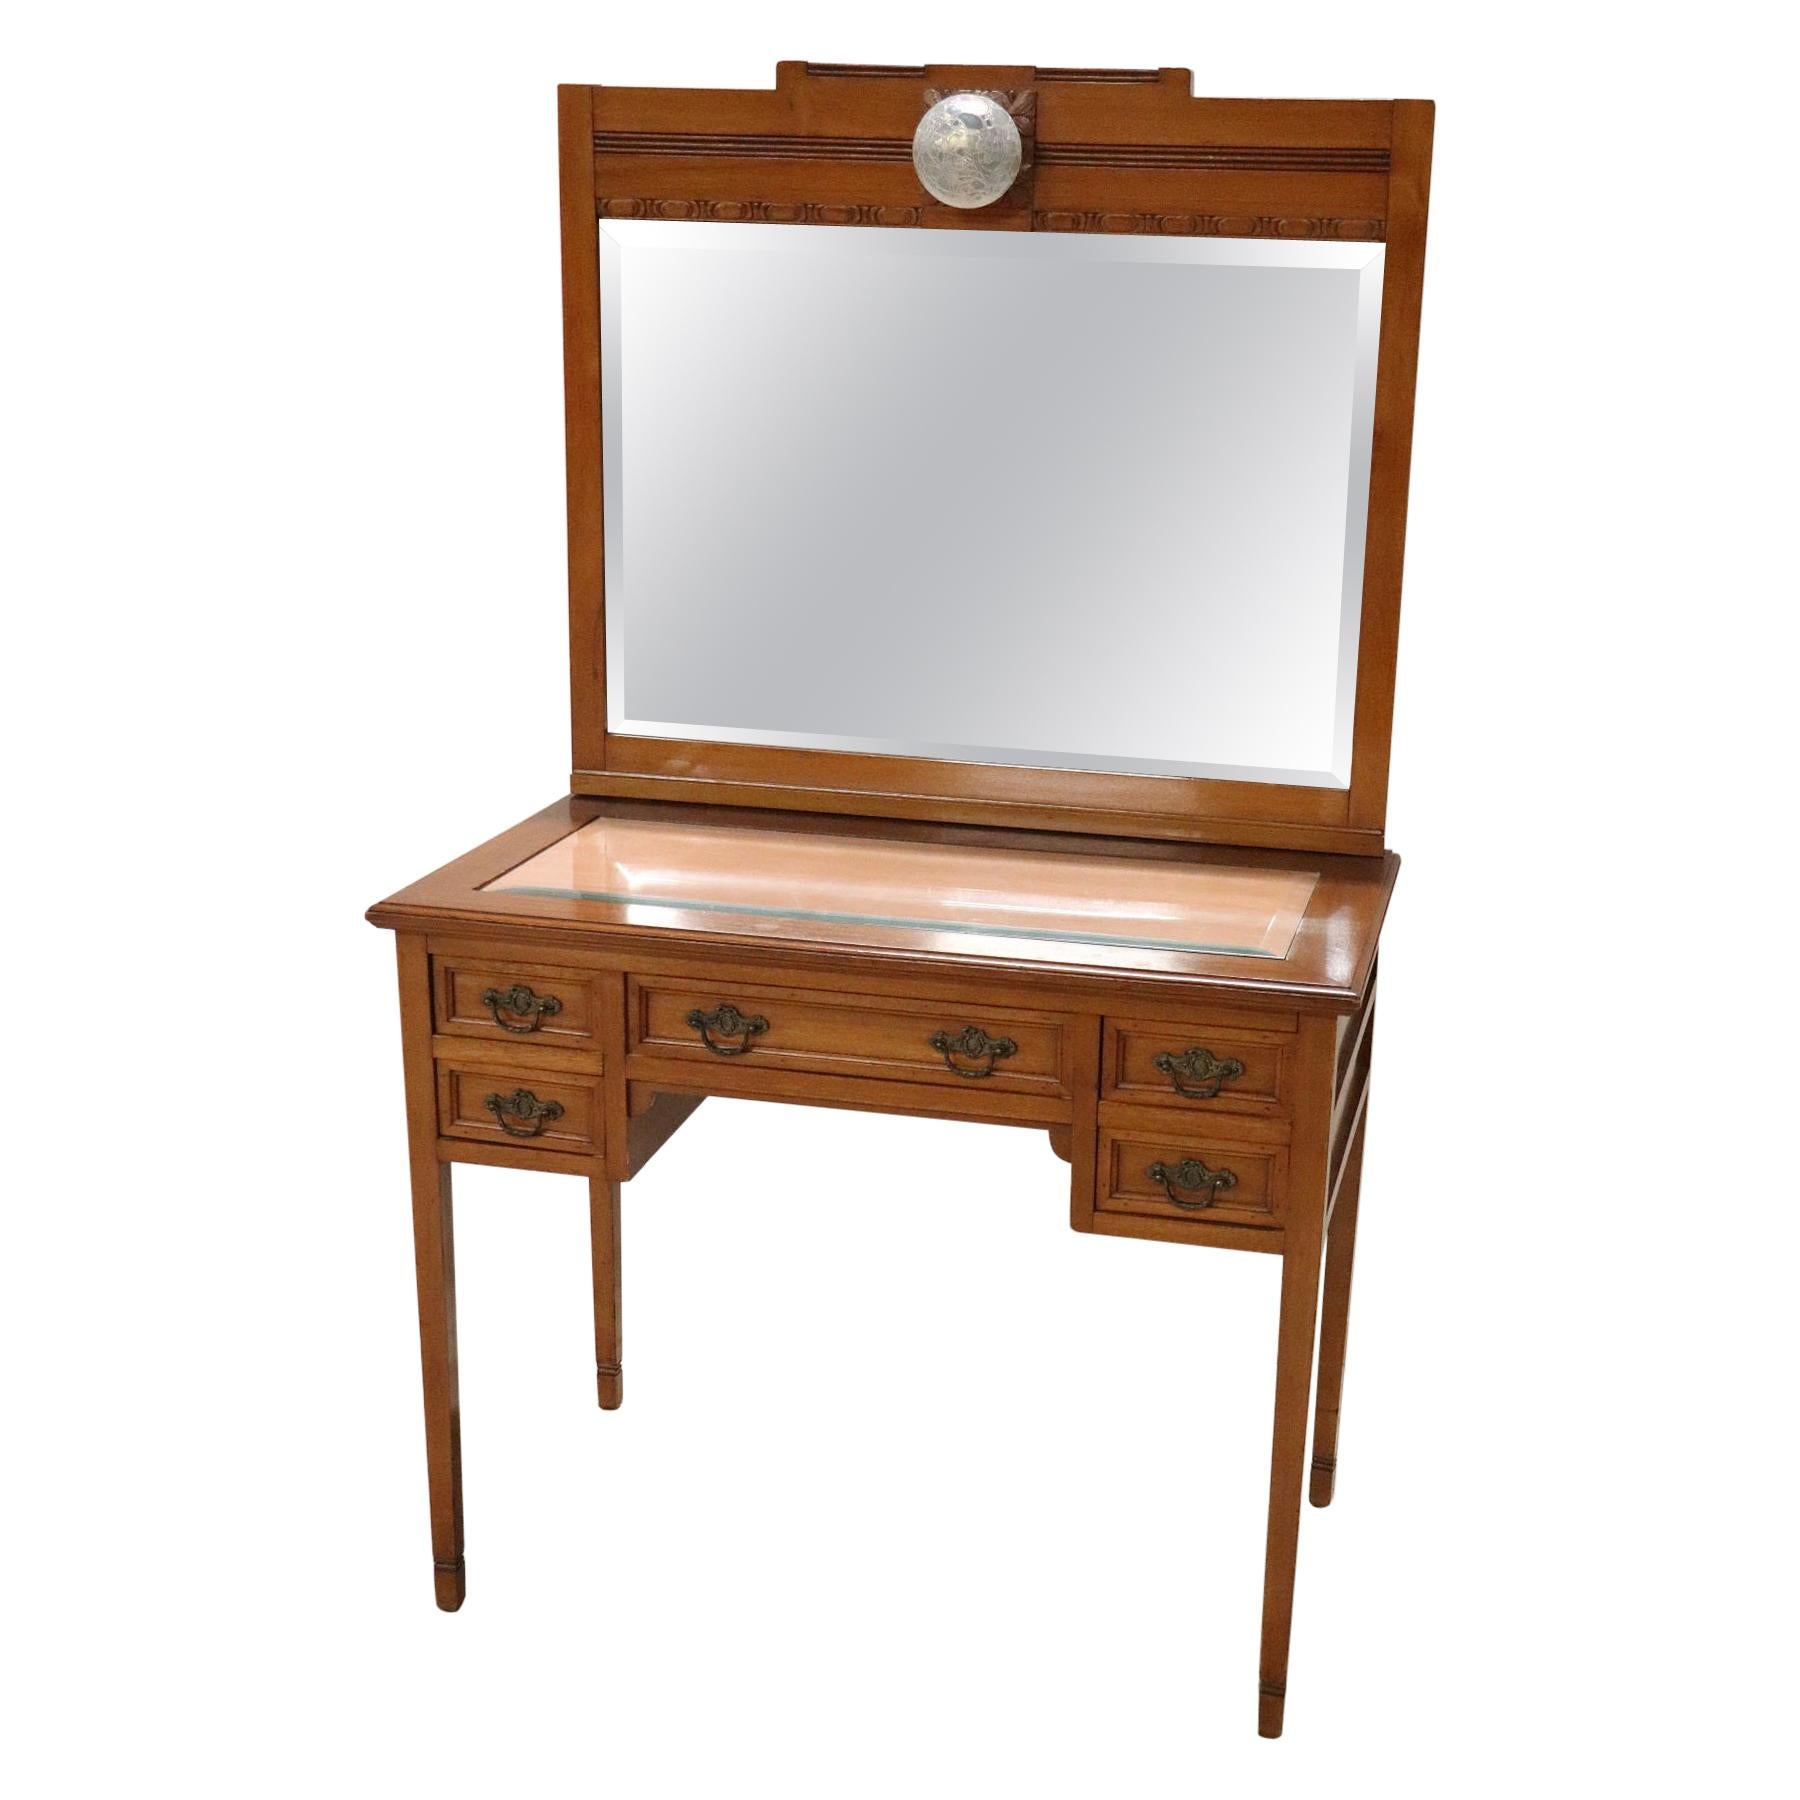 20th Century Walnut Vanity Table or Dressing Table